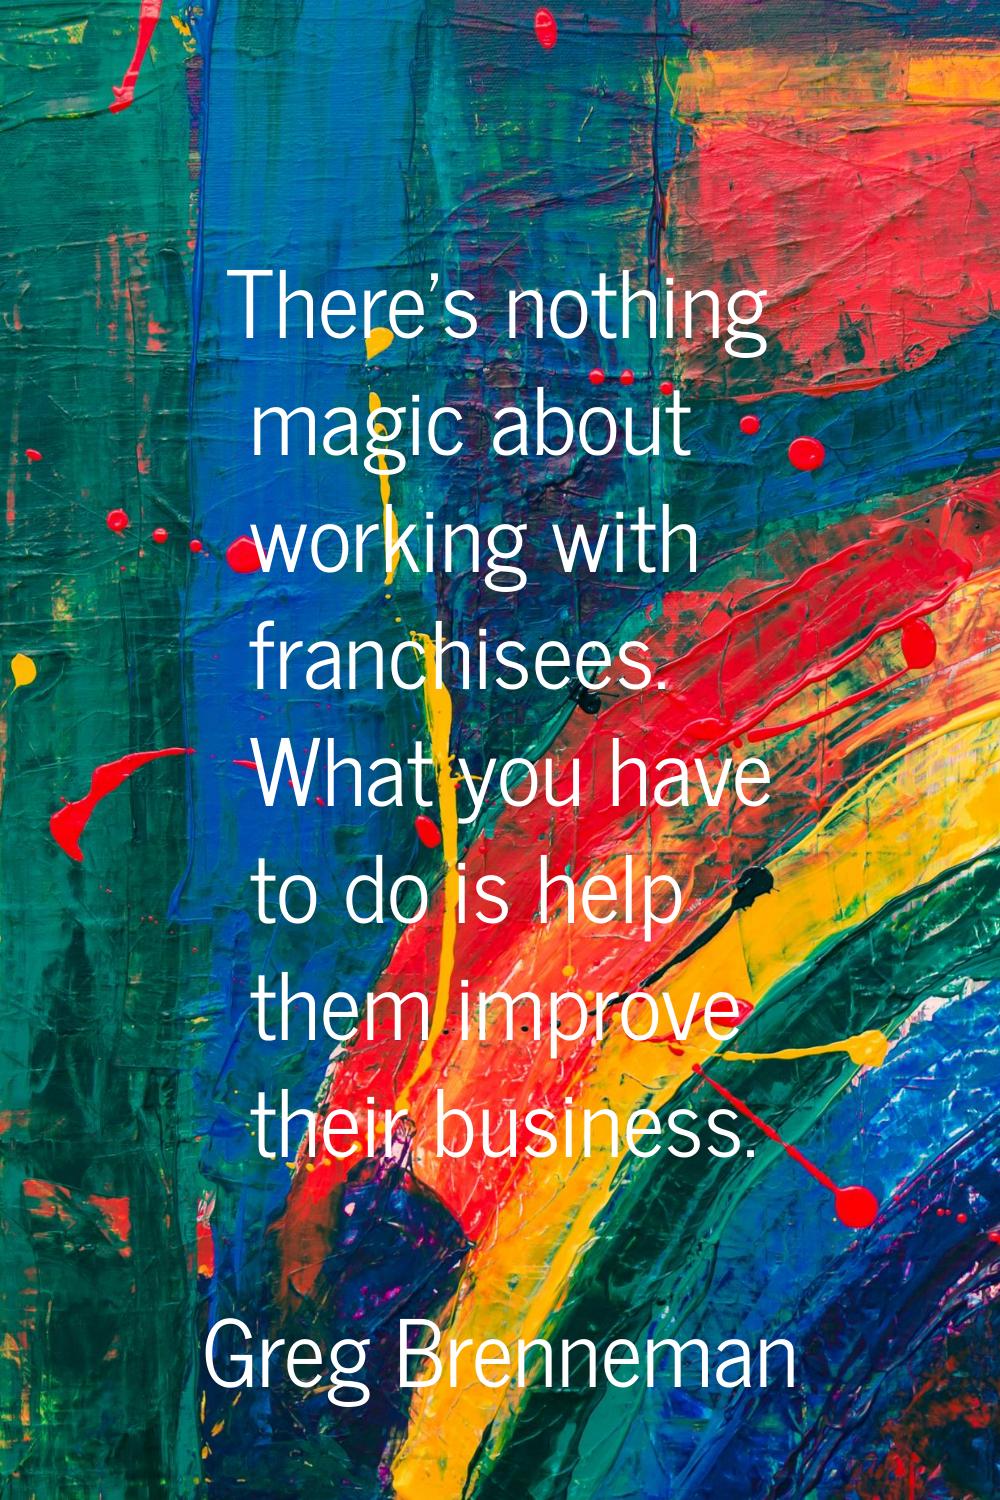 There's nothing magic about working with franchisees. What you have to do is help them improve thei